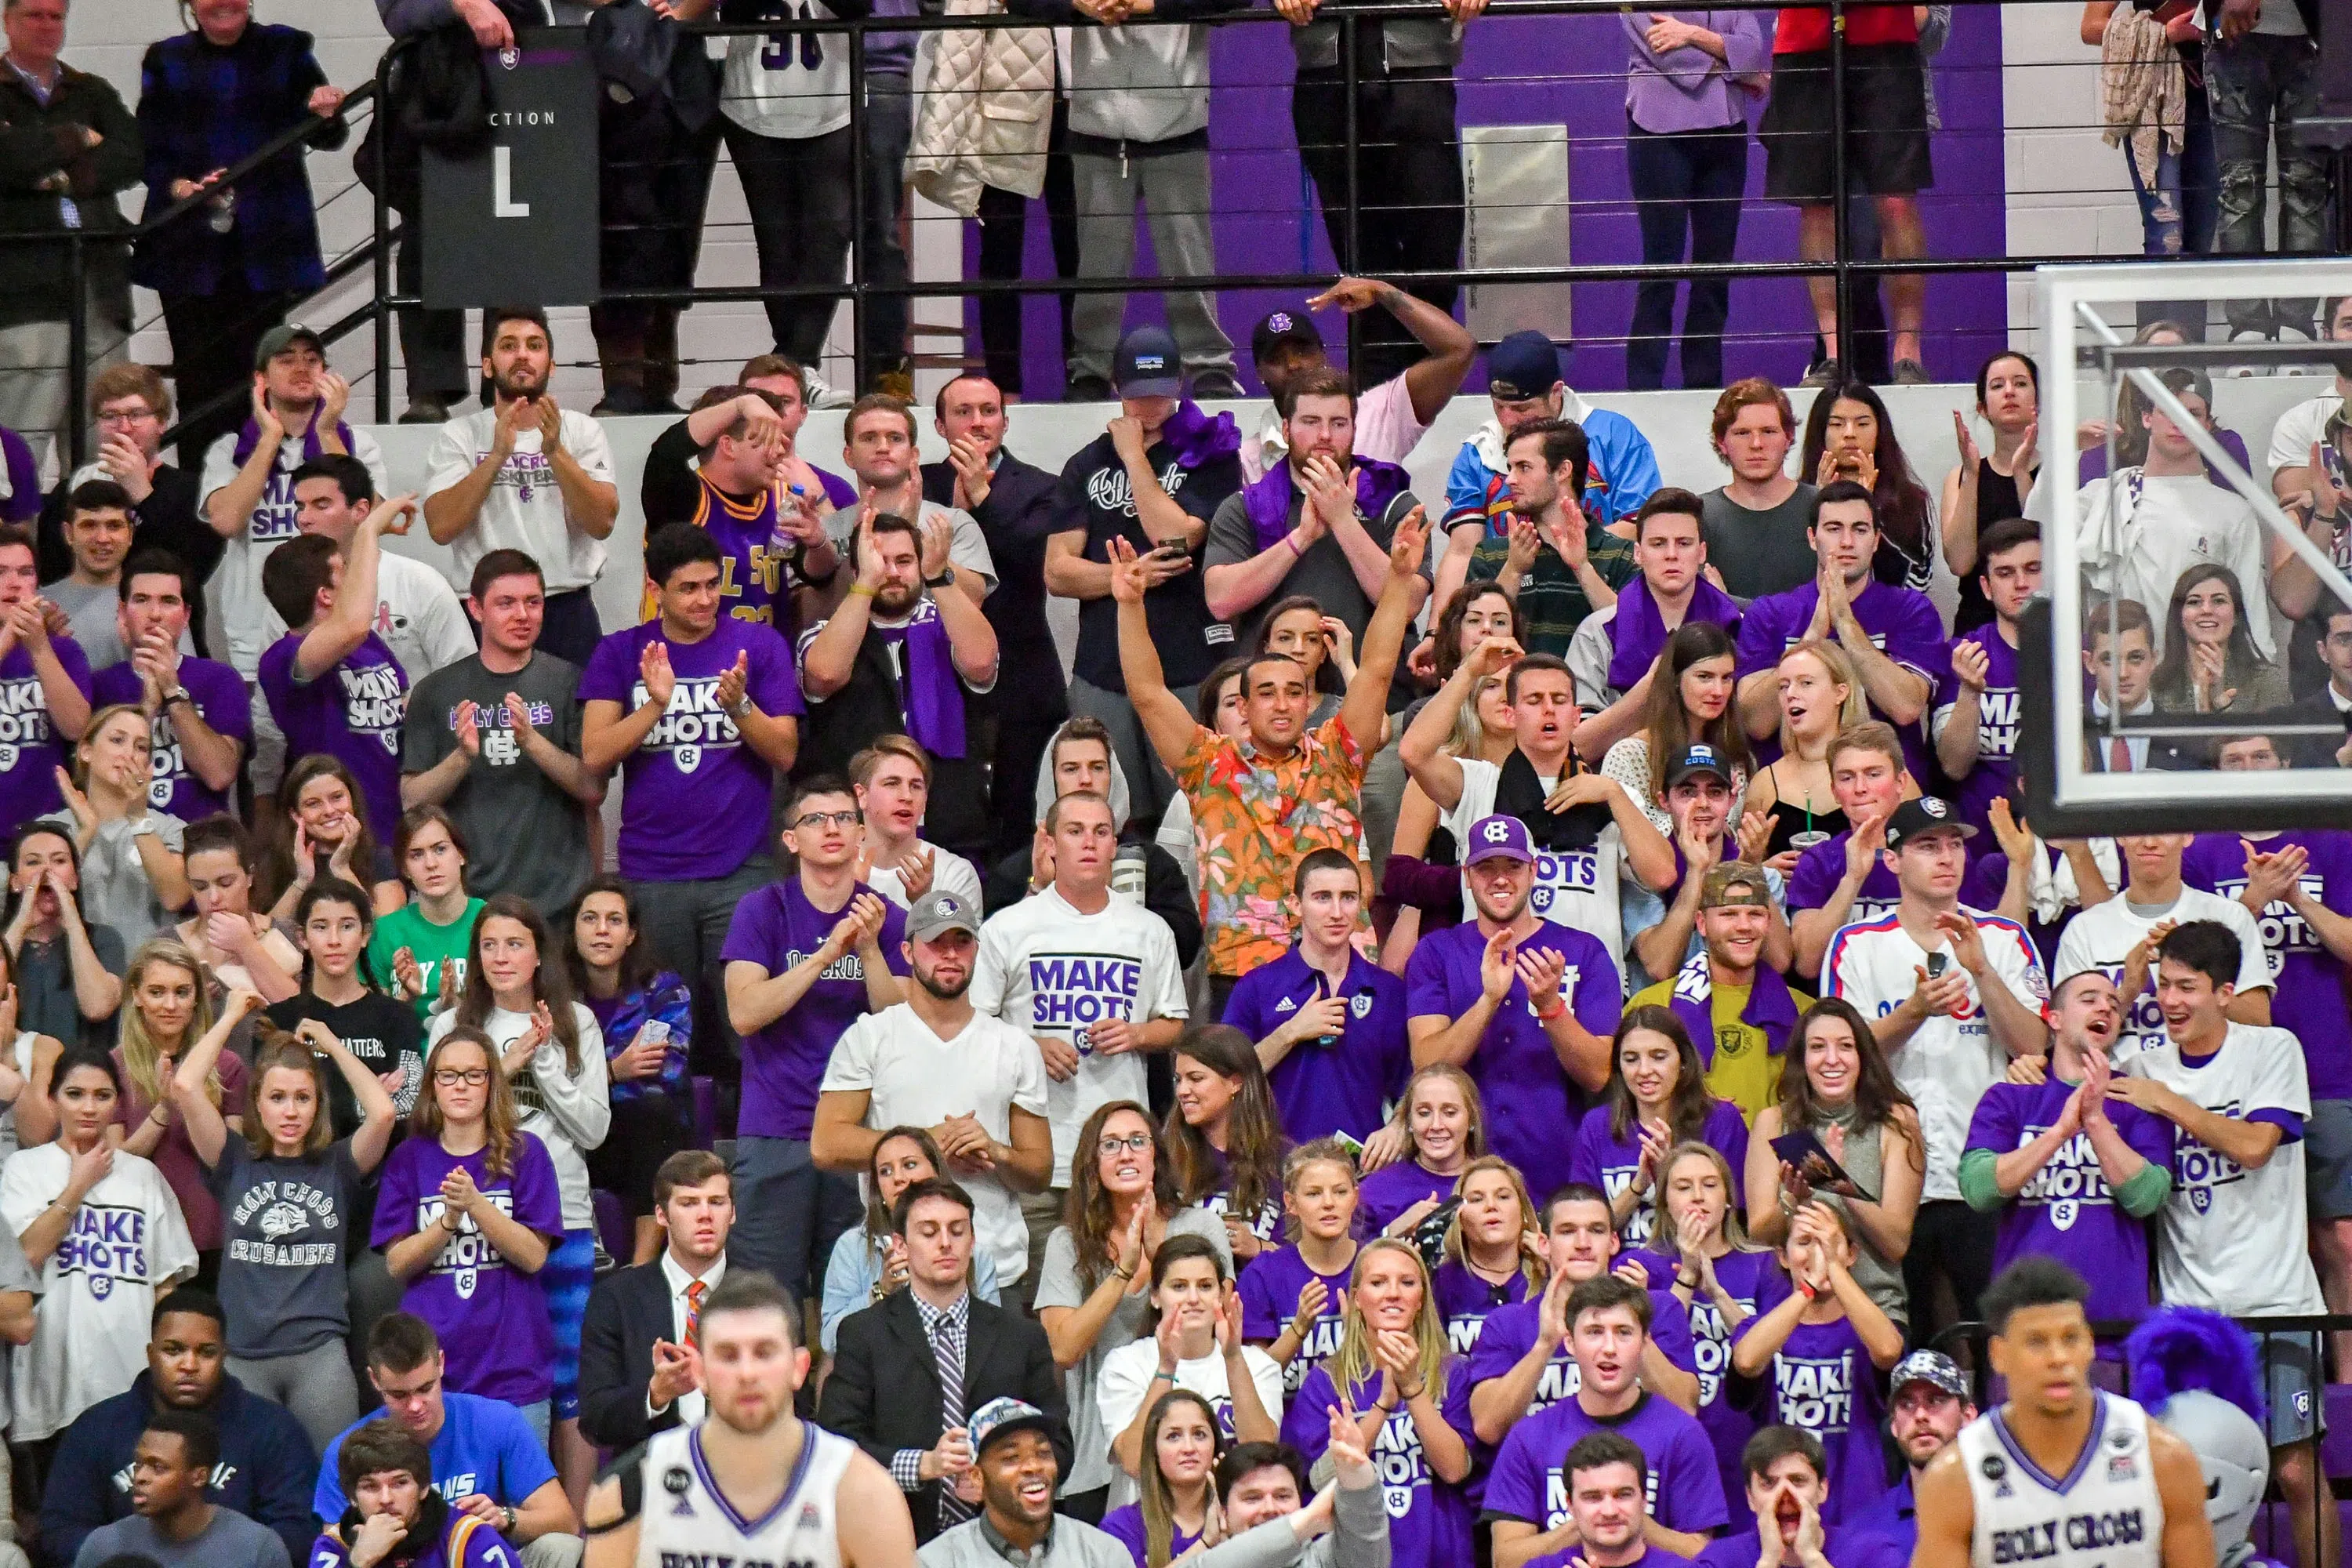 Student crowd at holy cross basketball game 